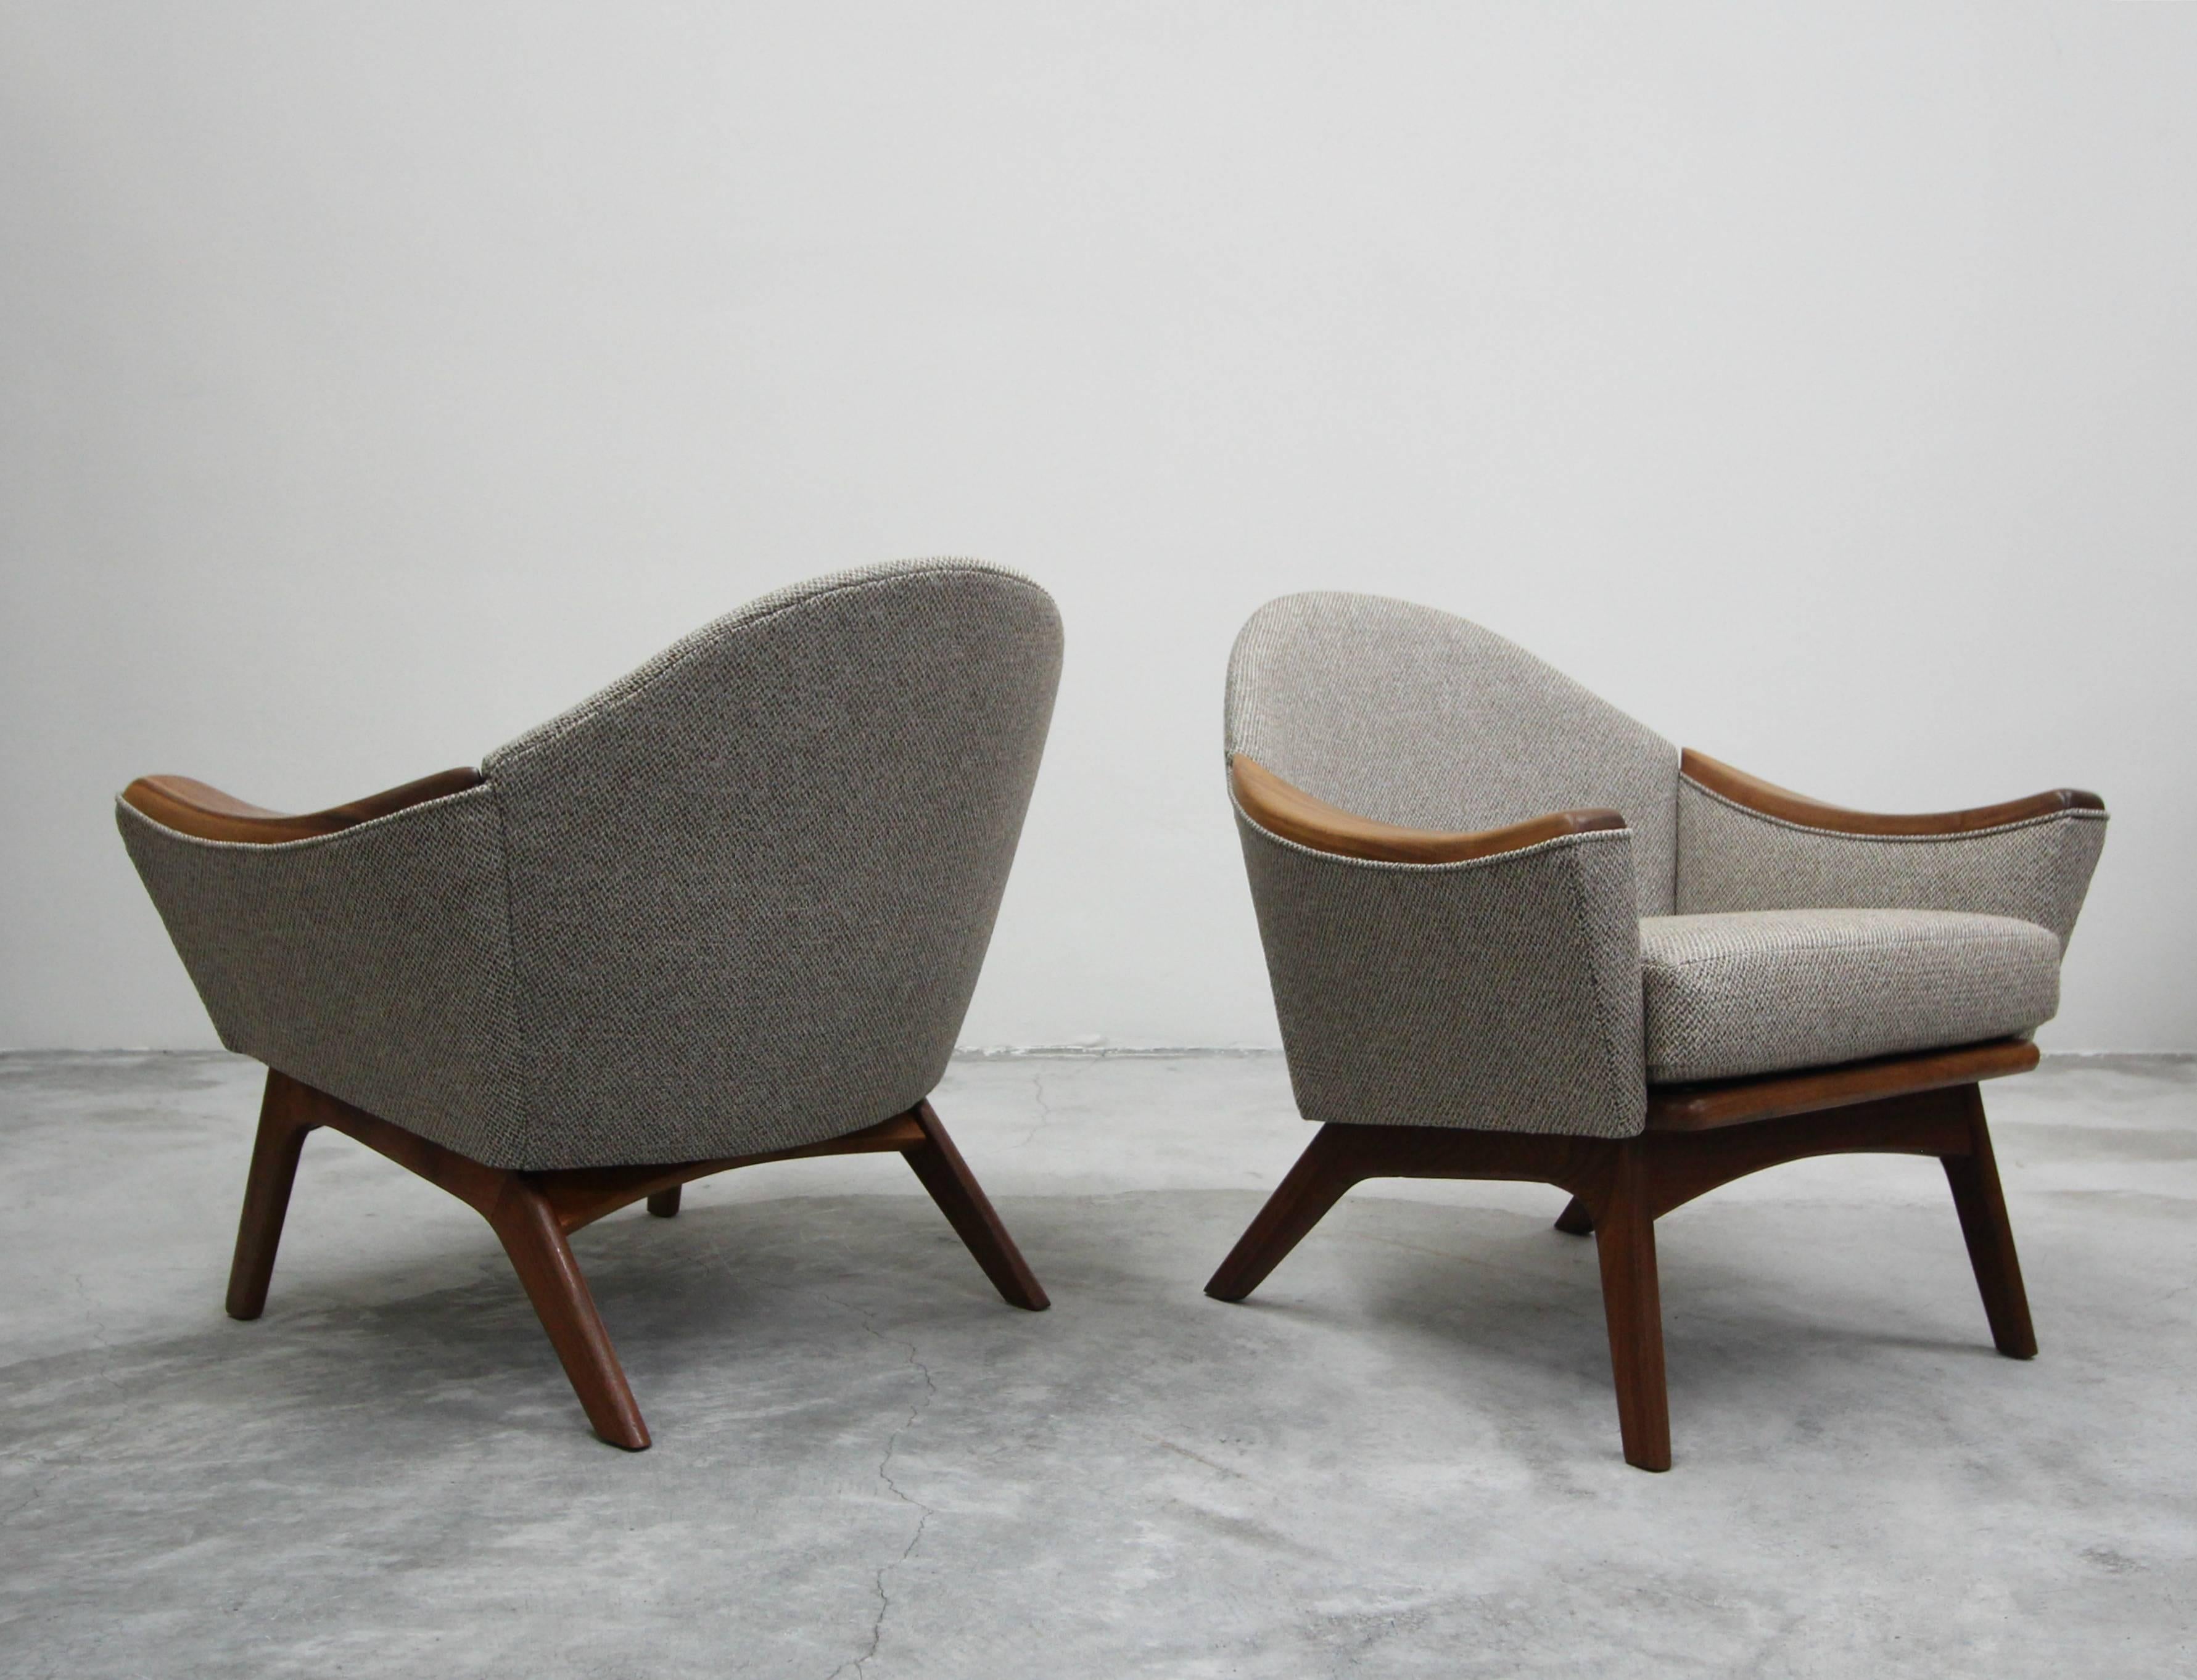 Classic pair of midcentury lounge chairs by Adrian Pearsall, Model 1806-C. These chairs have beautiful lines and walnut details. The walnut arms and bases perfectly compliment the new beige and gray tweed fabric.

Chairs have been professionally